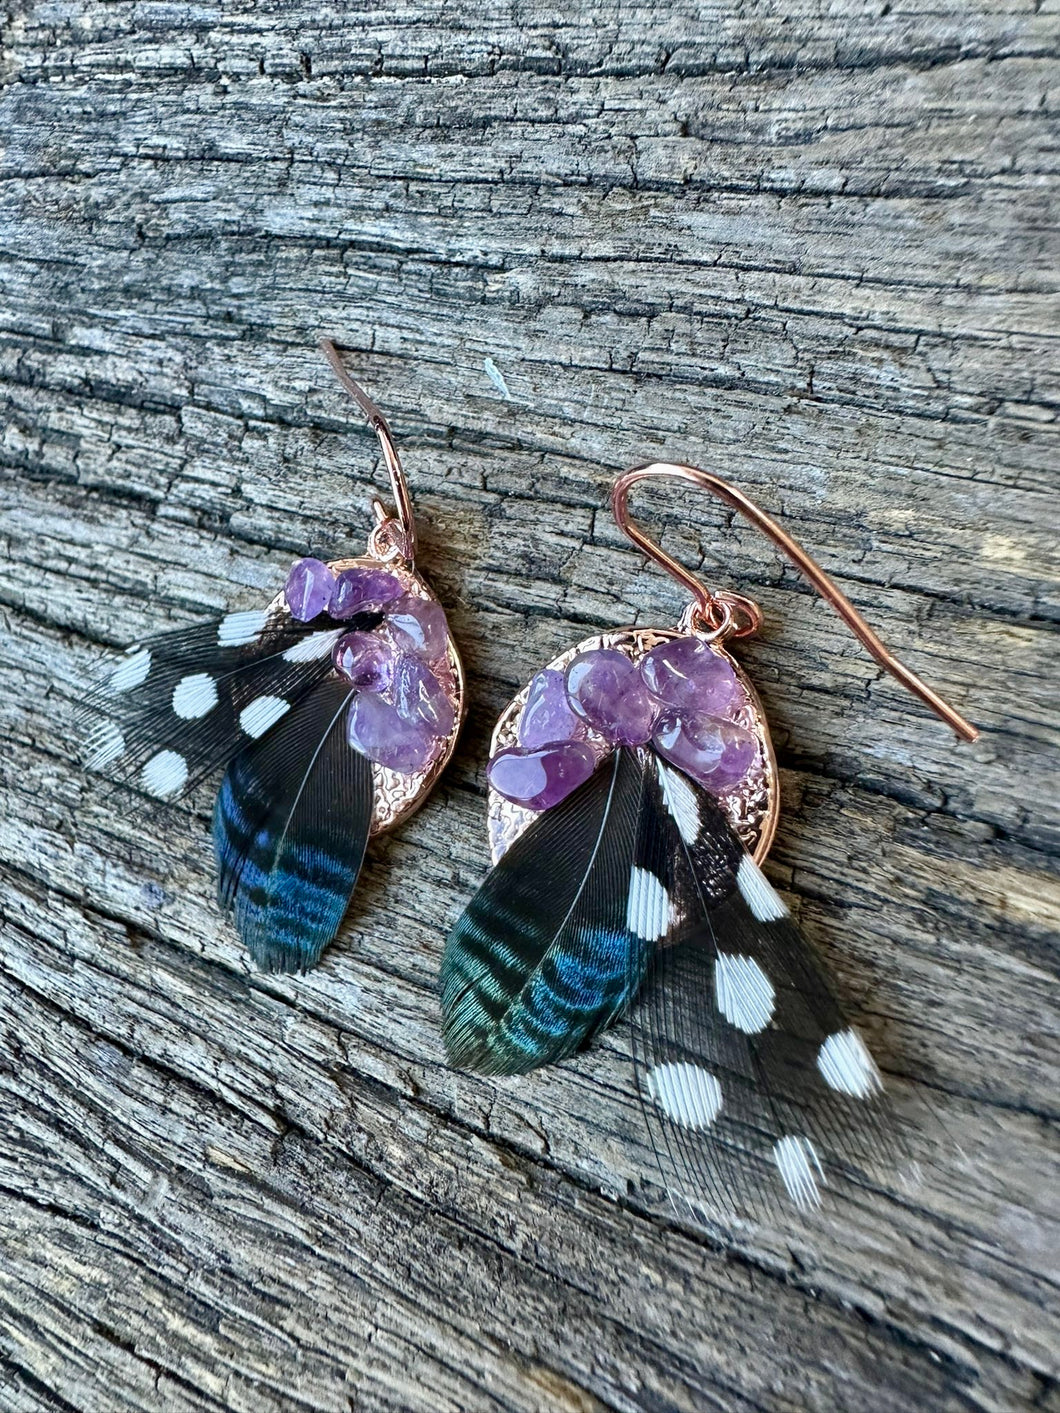 Speckled blues with amethyst